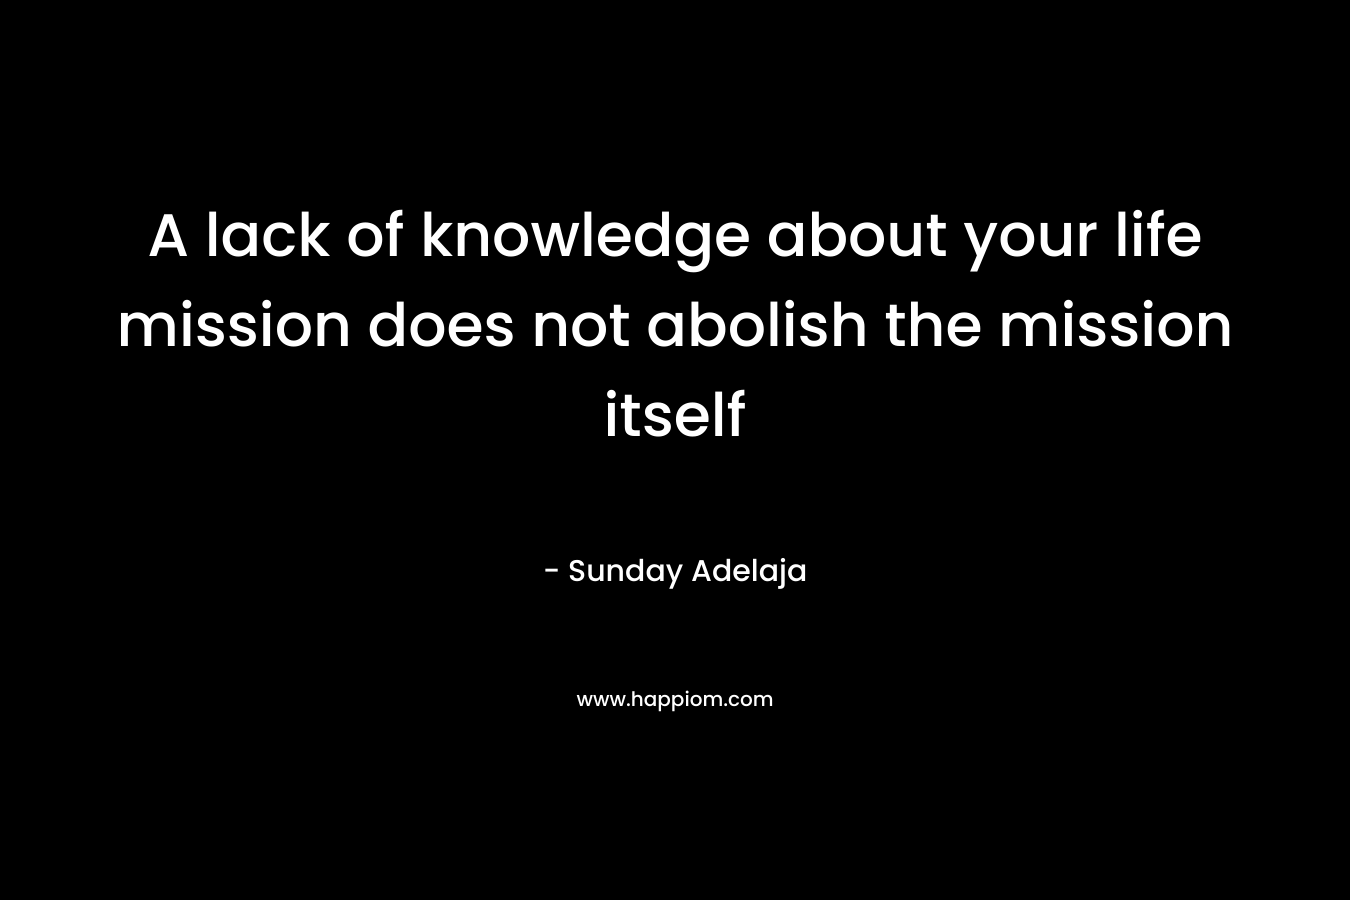 A lack of knowledge about your life mission does not abolish the mission itself